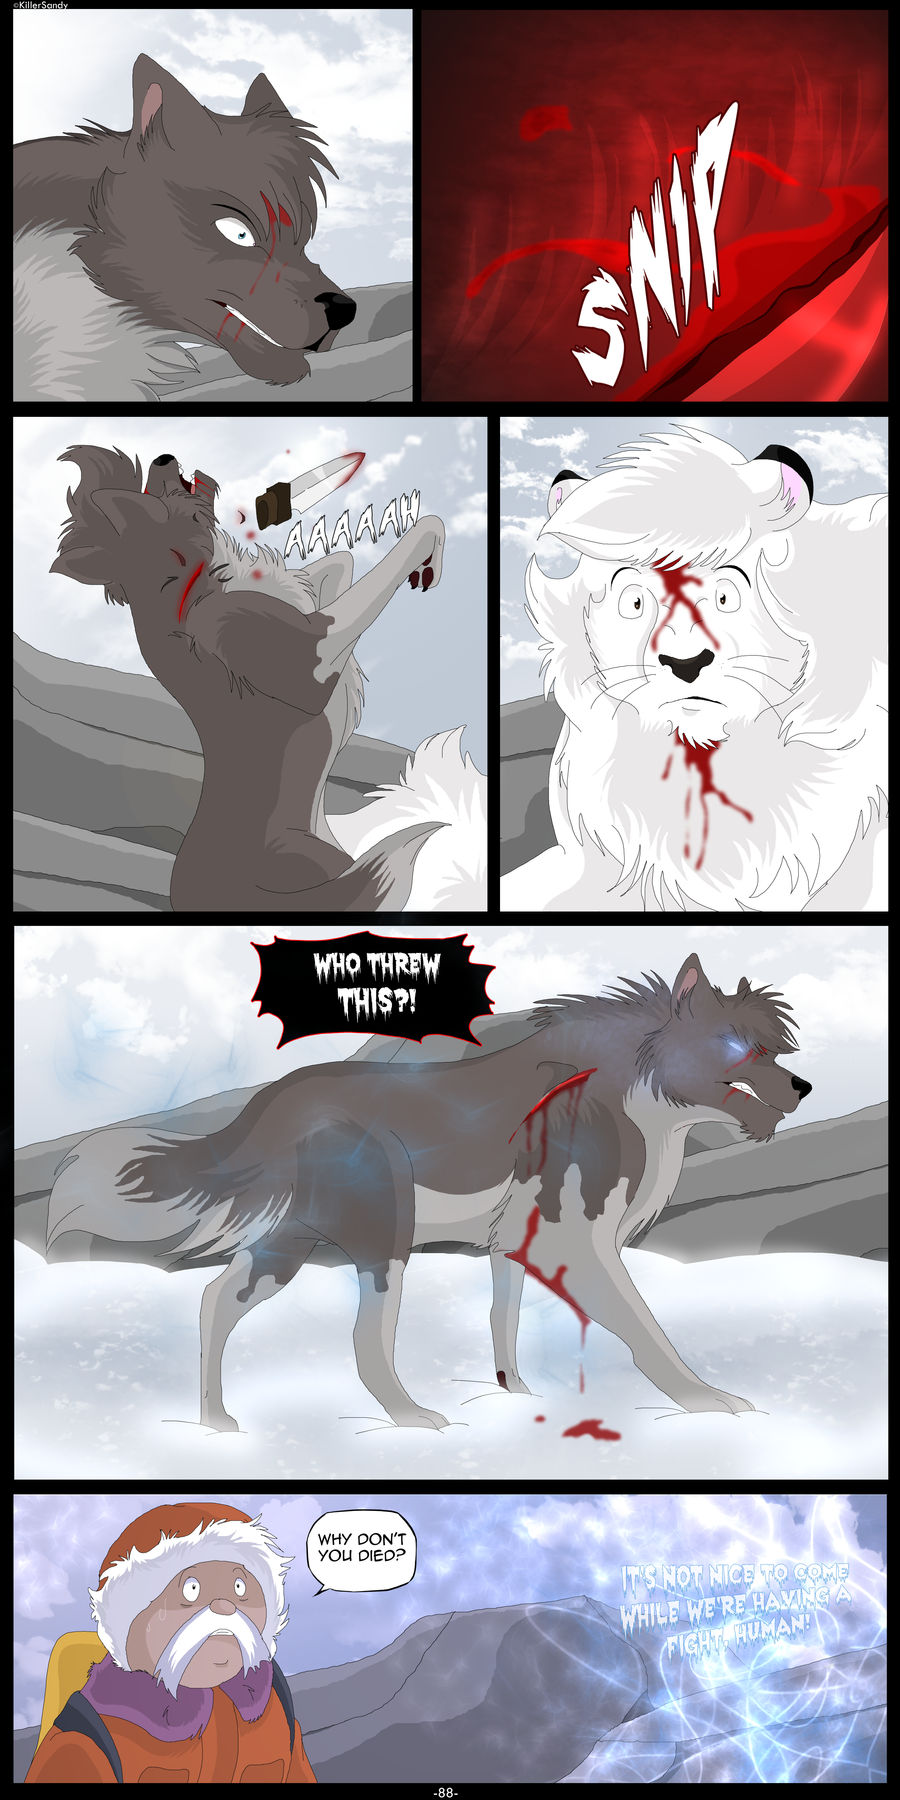 The Prince of the Moonlight Stone page 88